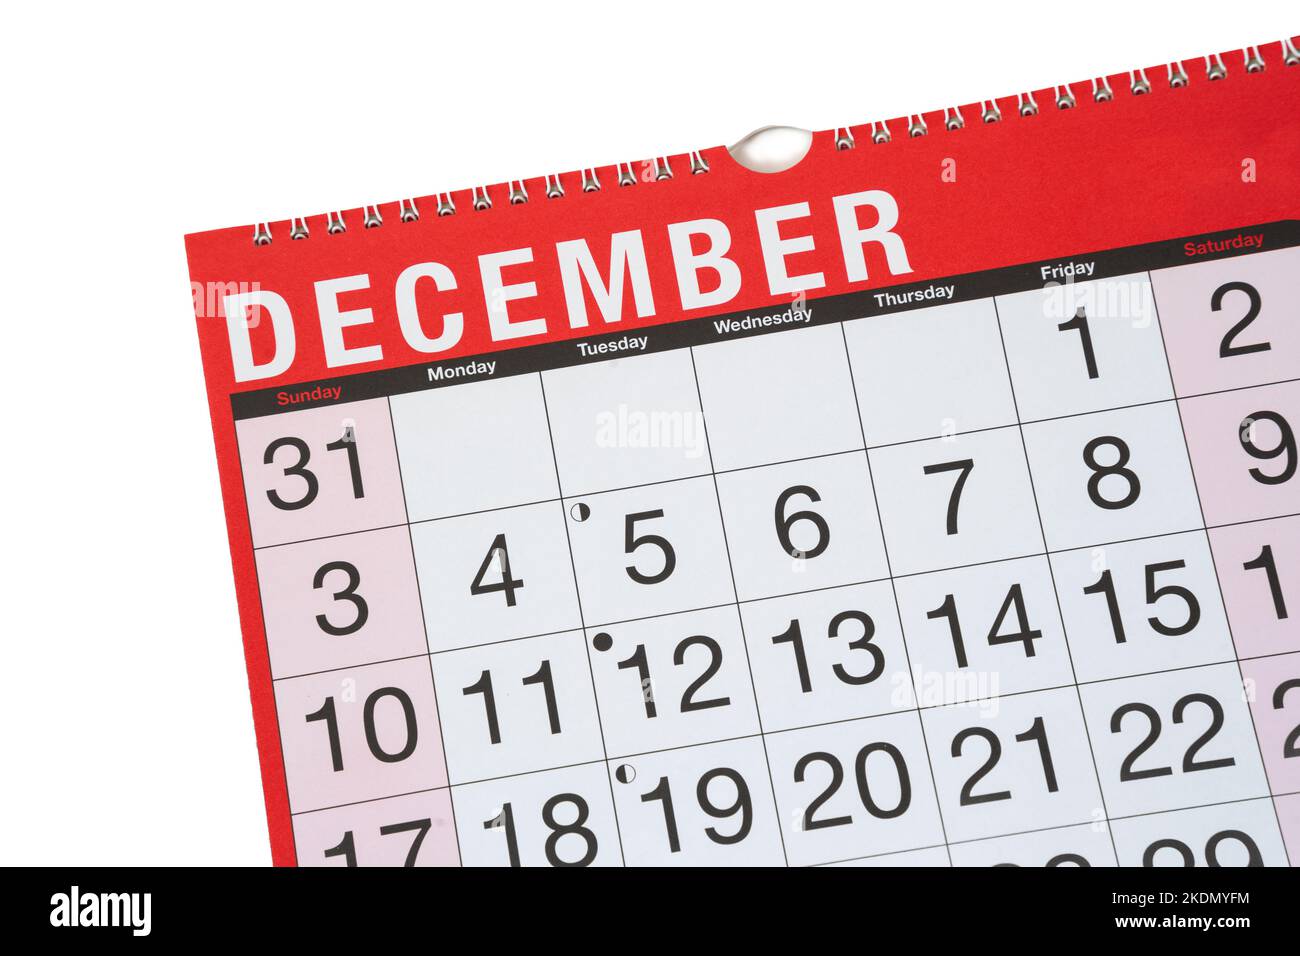 Calendar concept, month and dates with December selected Stock Photo